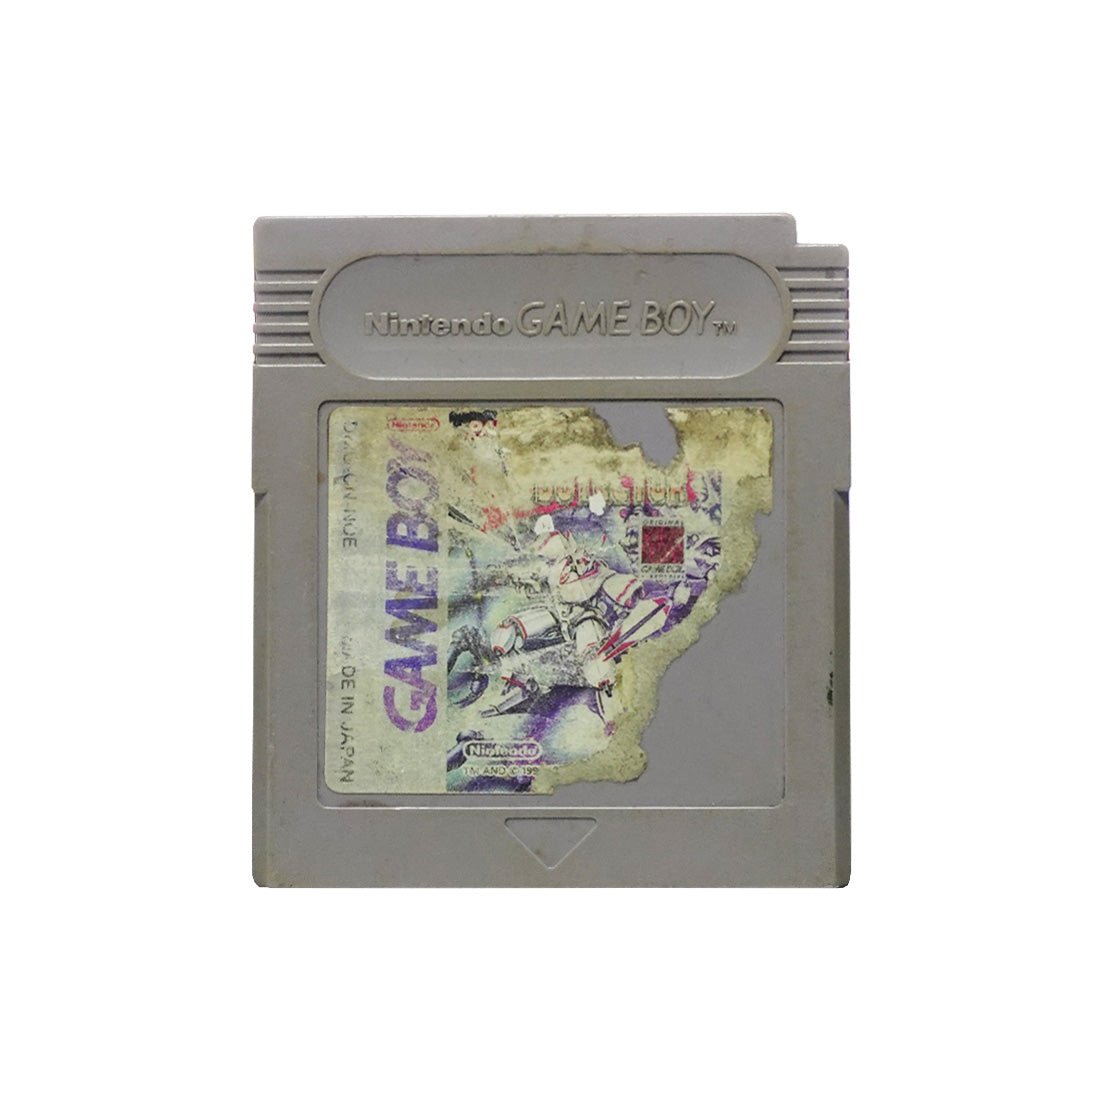 (Pre-Owned) Probotector - Gameboy Classic - ريترو - Store 974 | ستور ٩٧٤